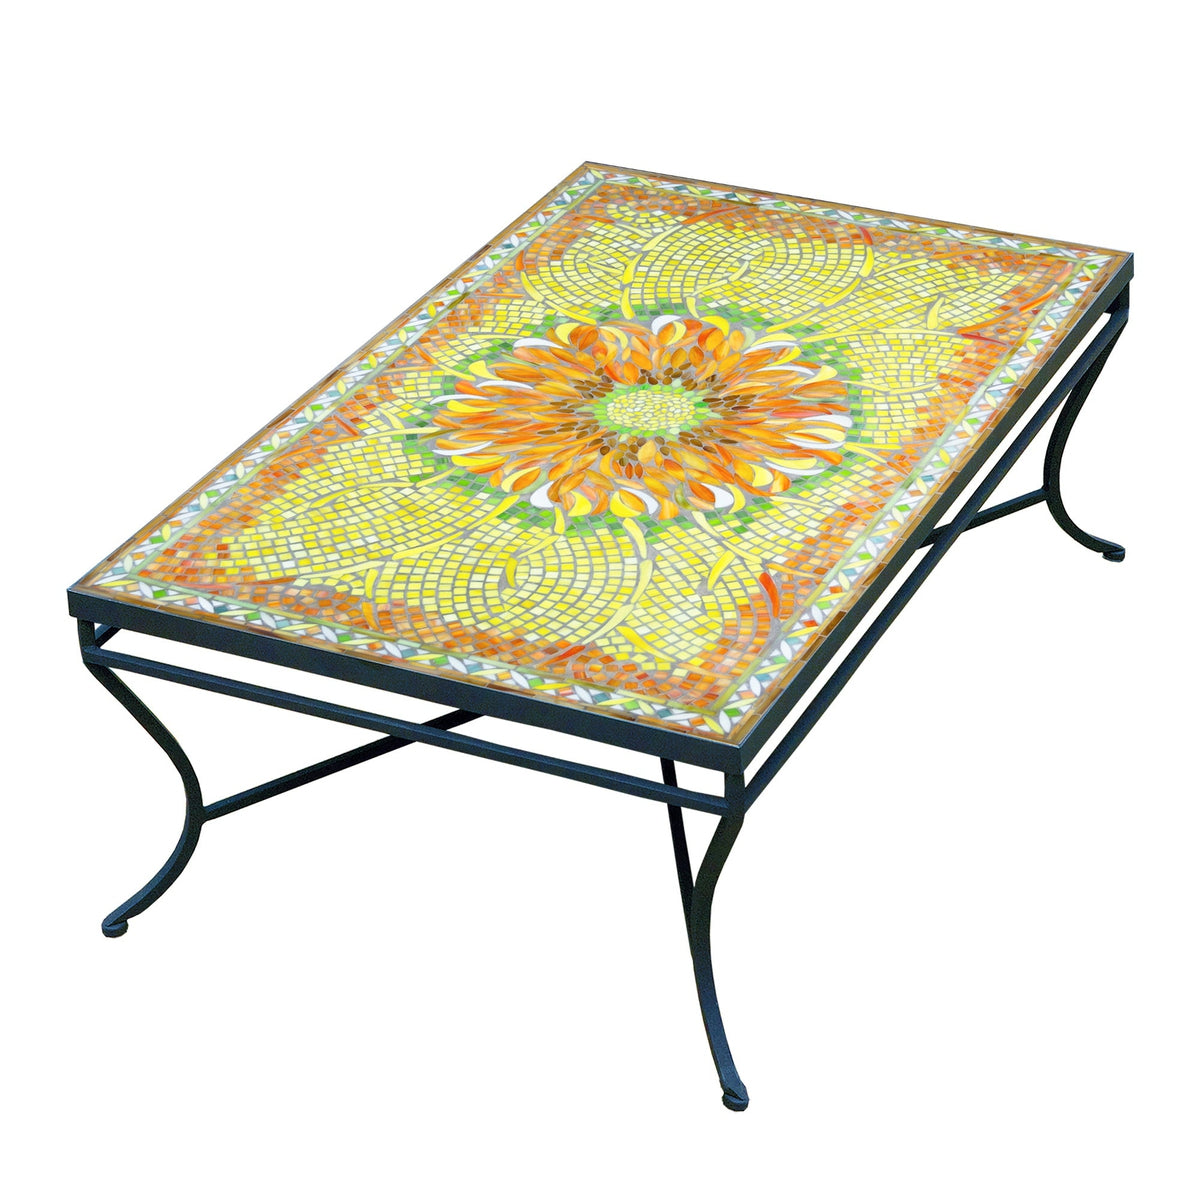 Umbria Mosaic Coffee Table - Rect